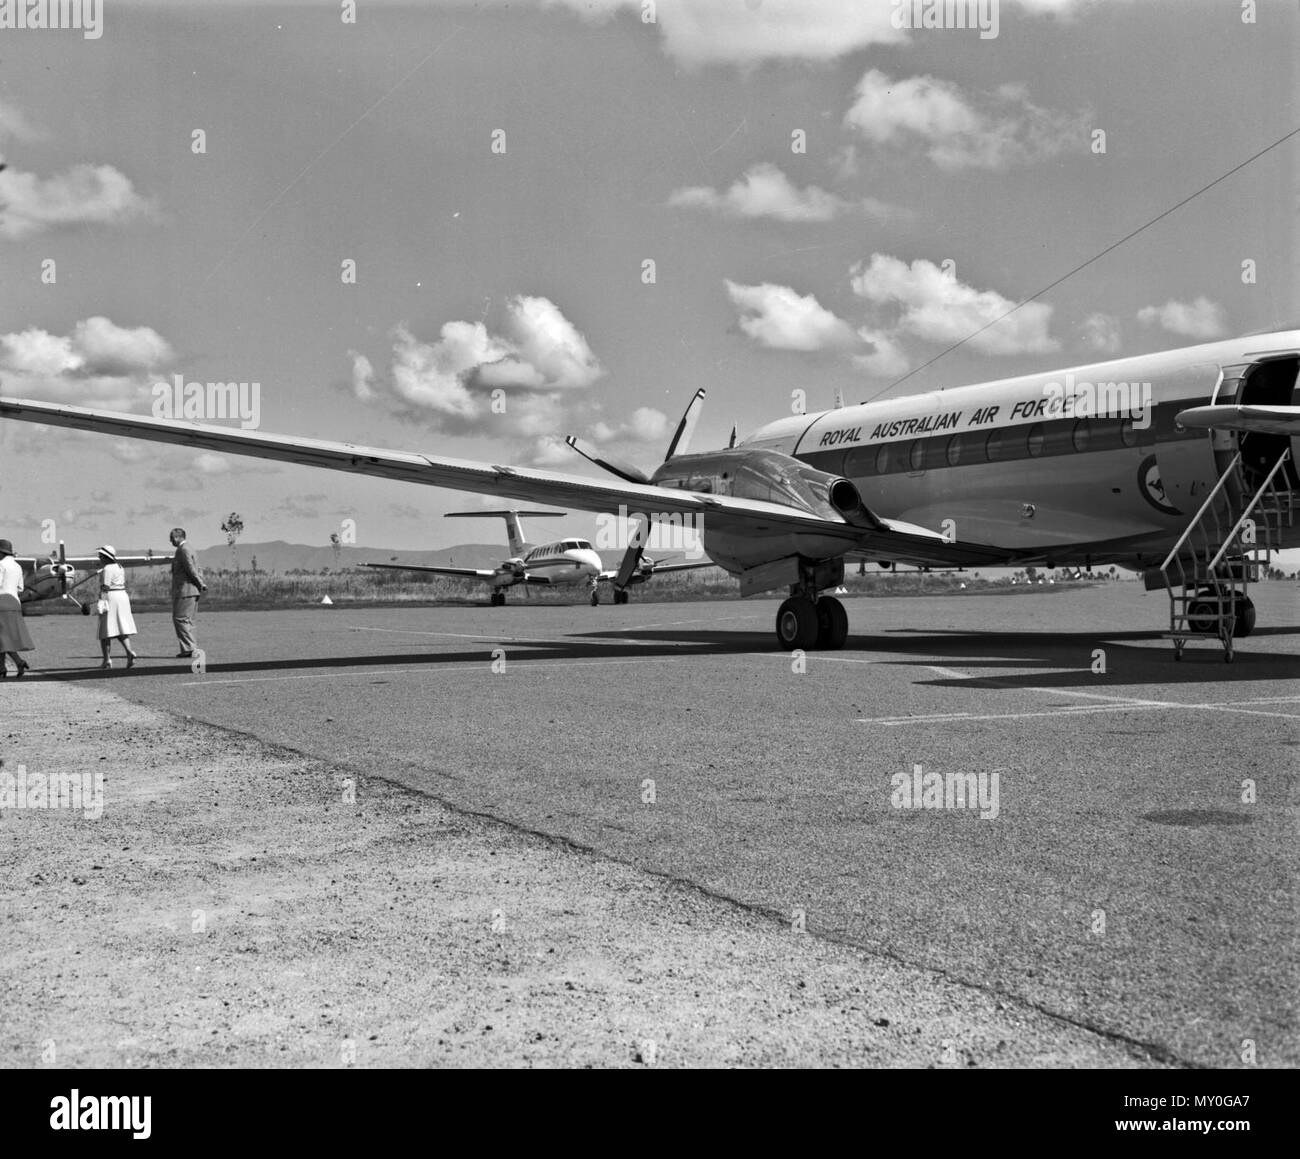 VIP aircraft, Ingham, 2 July 1979. Queensland Government Beech 200 Super King Air and Royal Australian Air Force Hawker Siddeley HS 748 at Ingham Airport. They had brought Premier Sir Joh Bjelke-Petersen and Prime Minister Malcolm Fraser for the opening of the Lucinda deep water port. Stock Photo